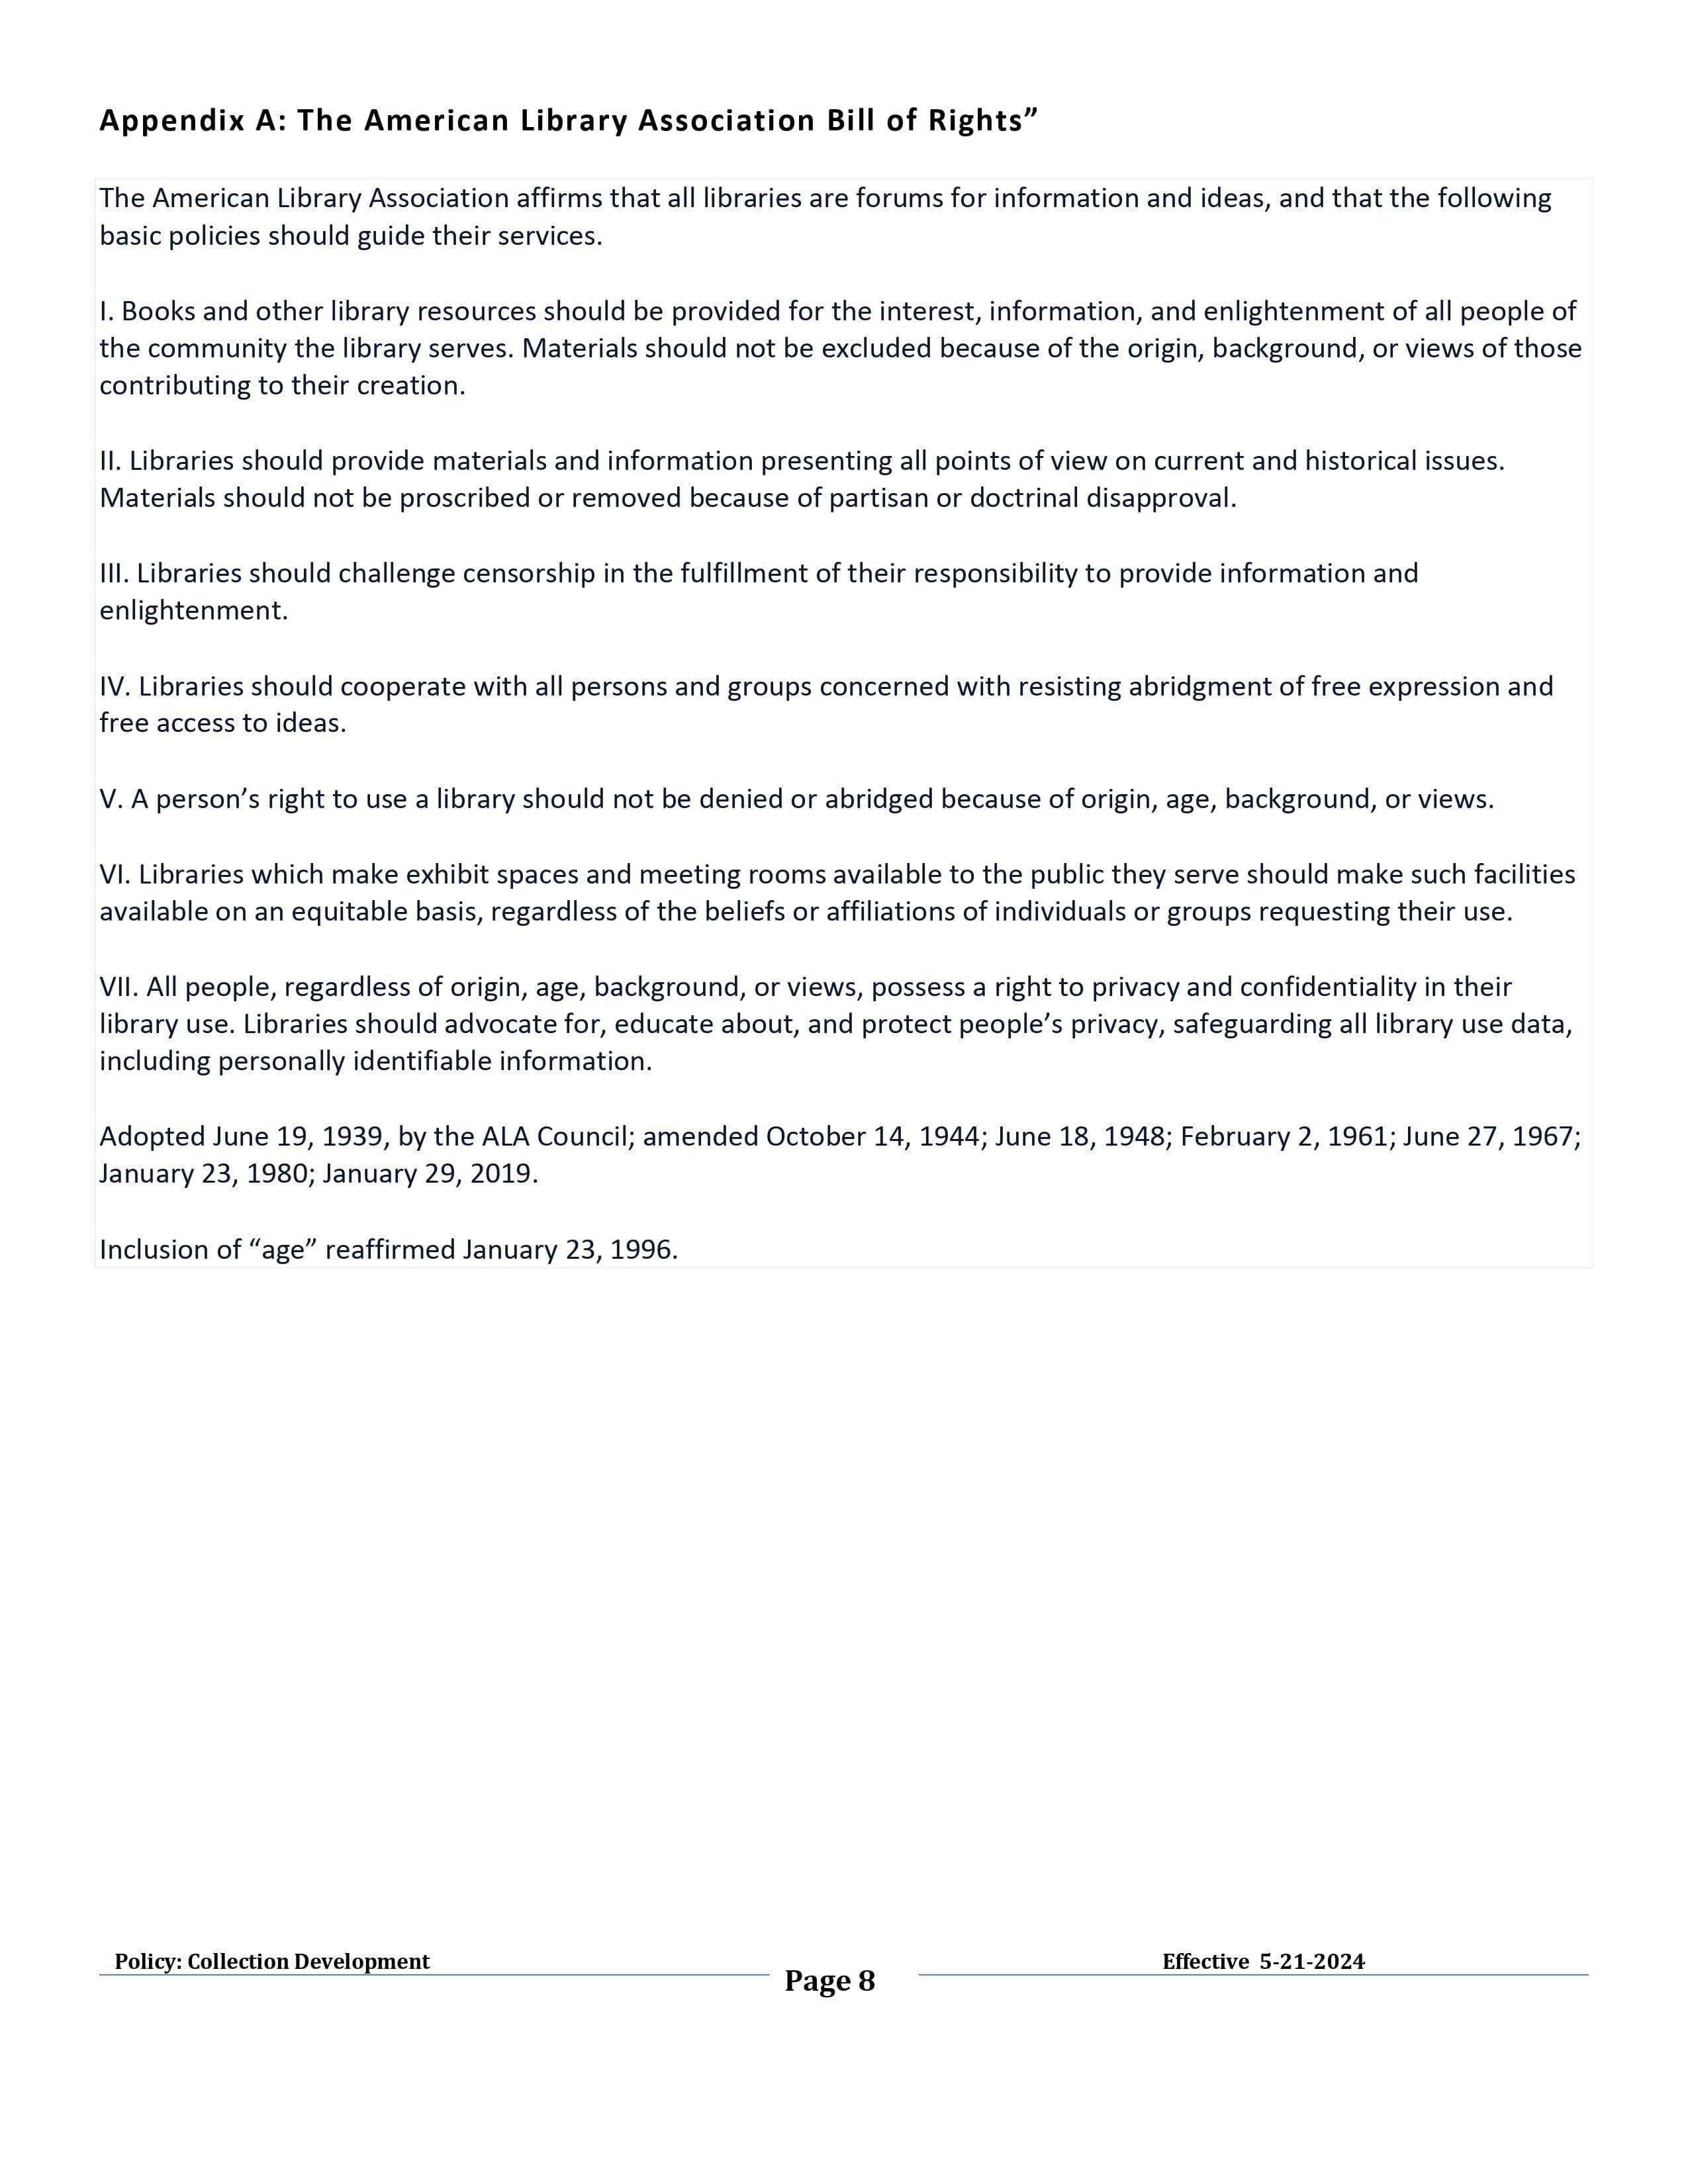 Collection Development Policy Page 8